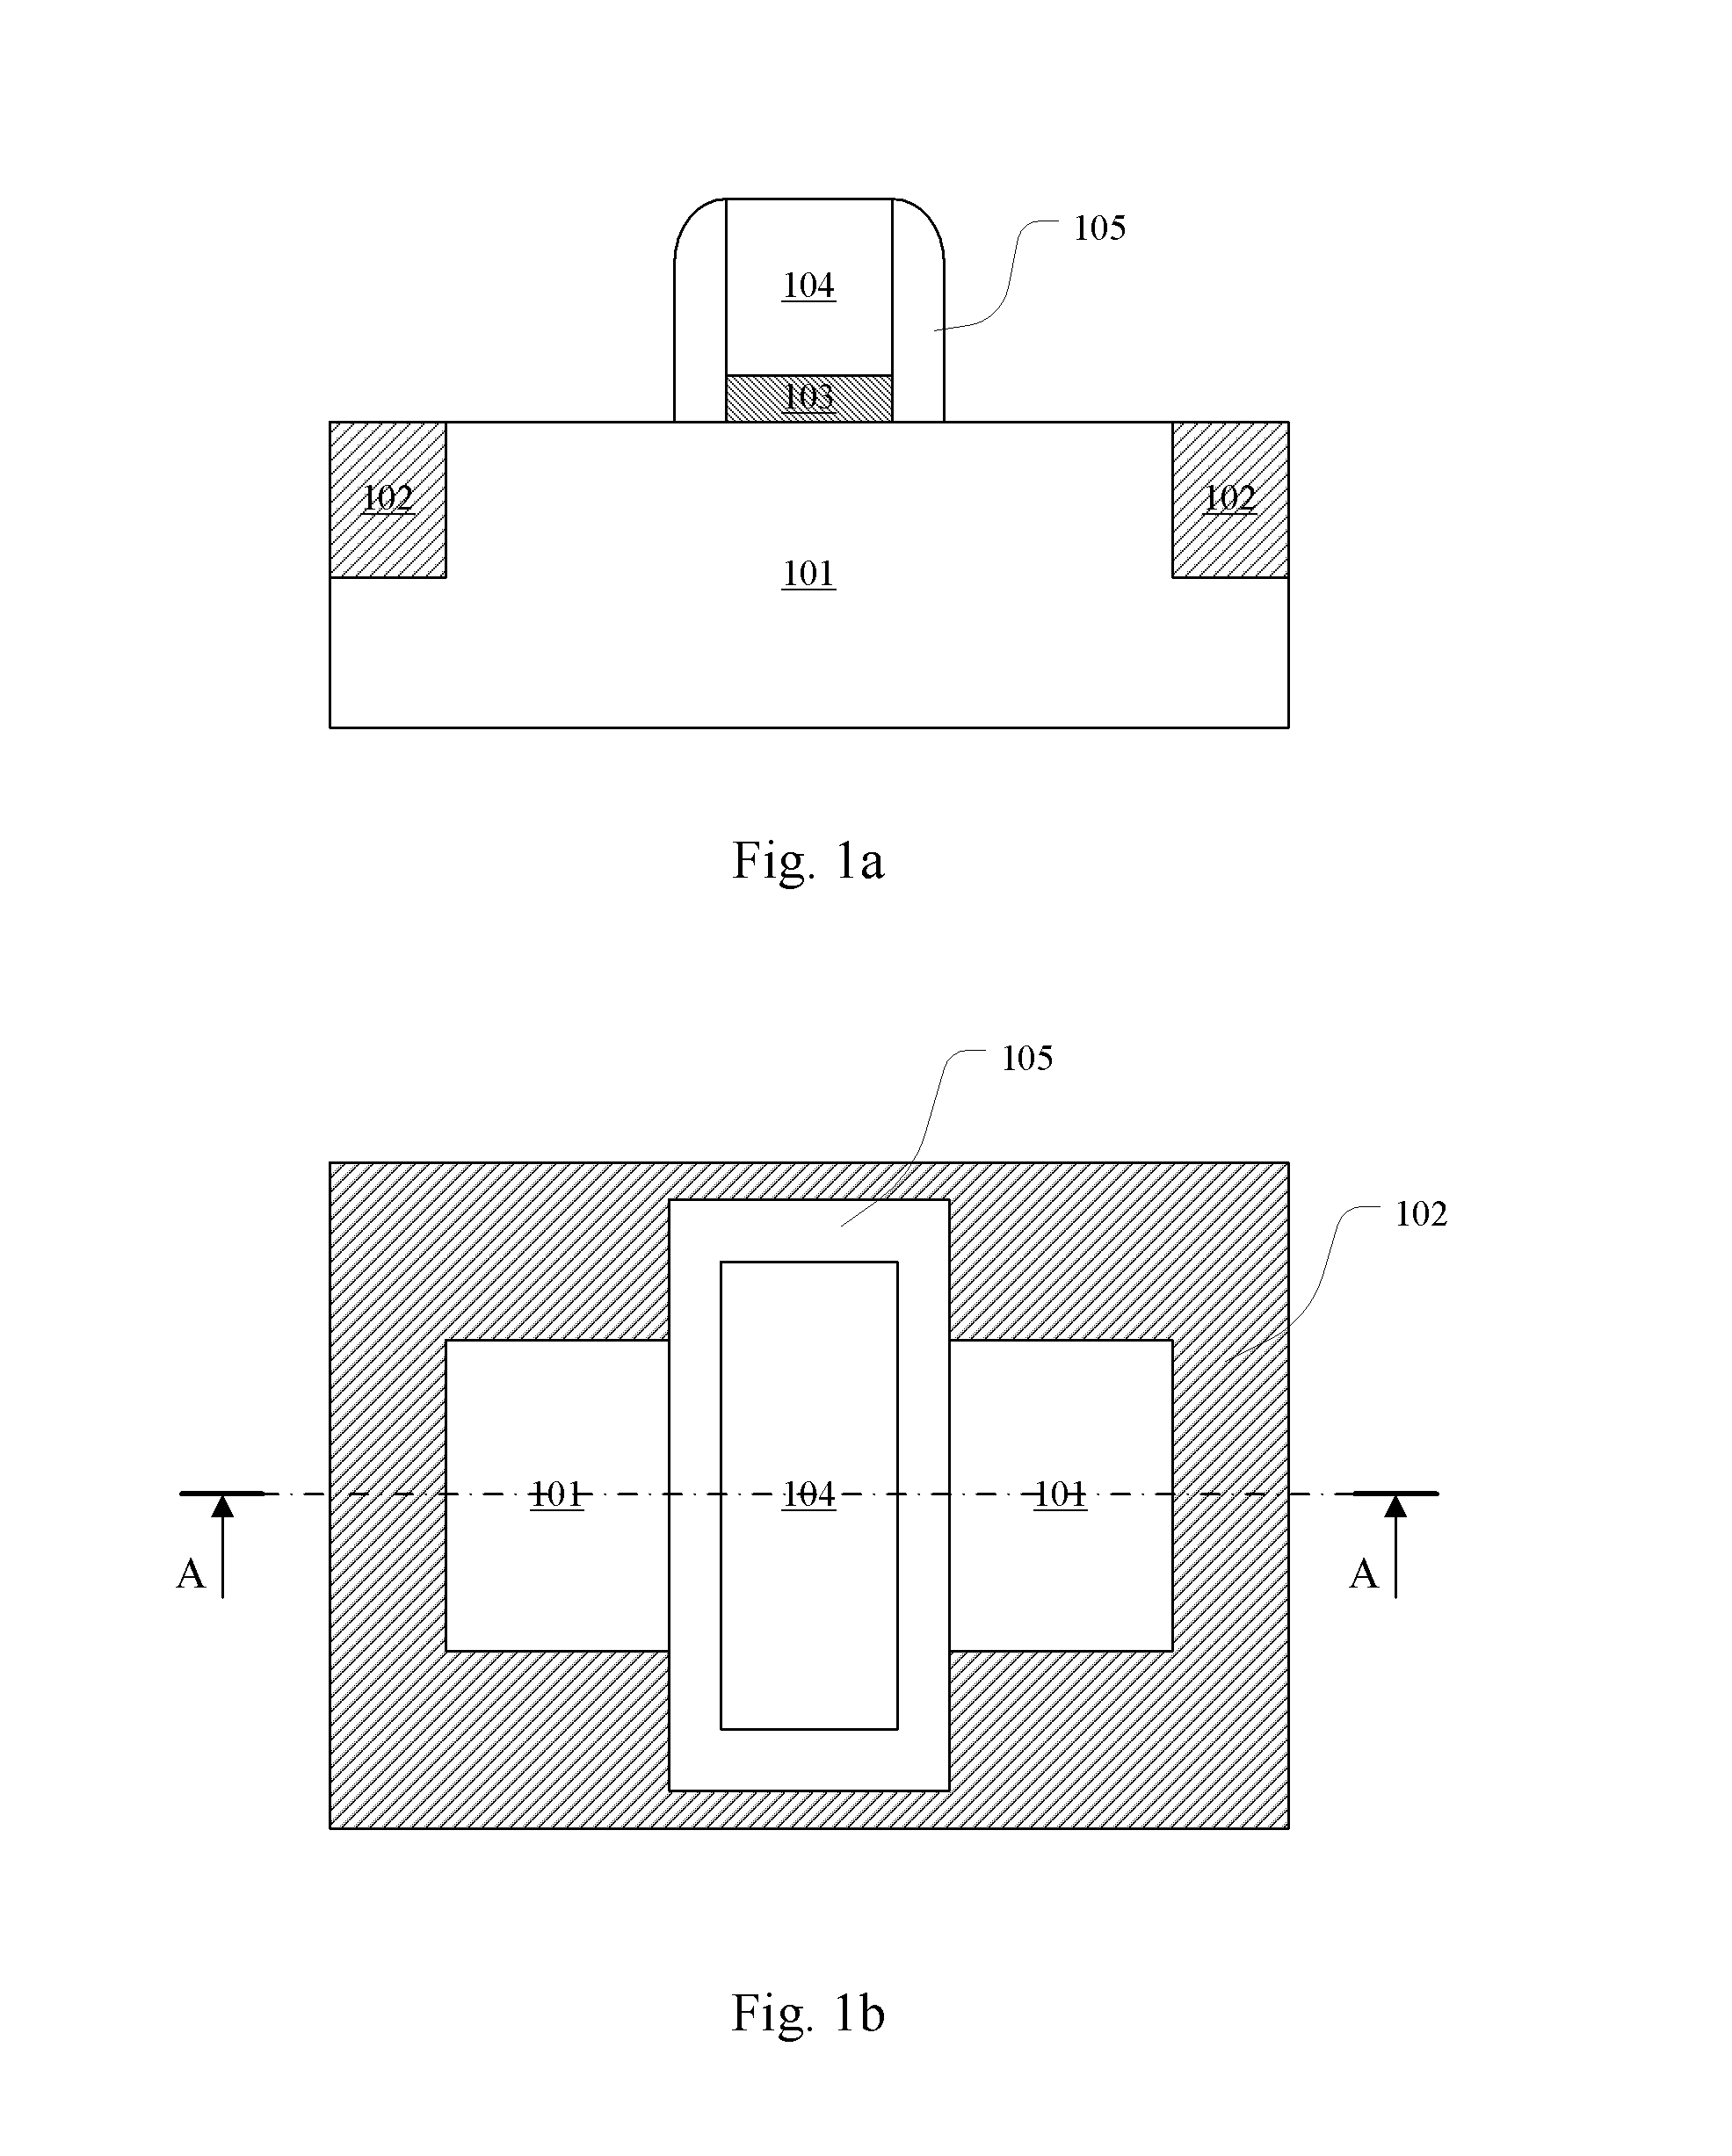 Method of manufacturing mosfet